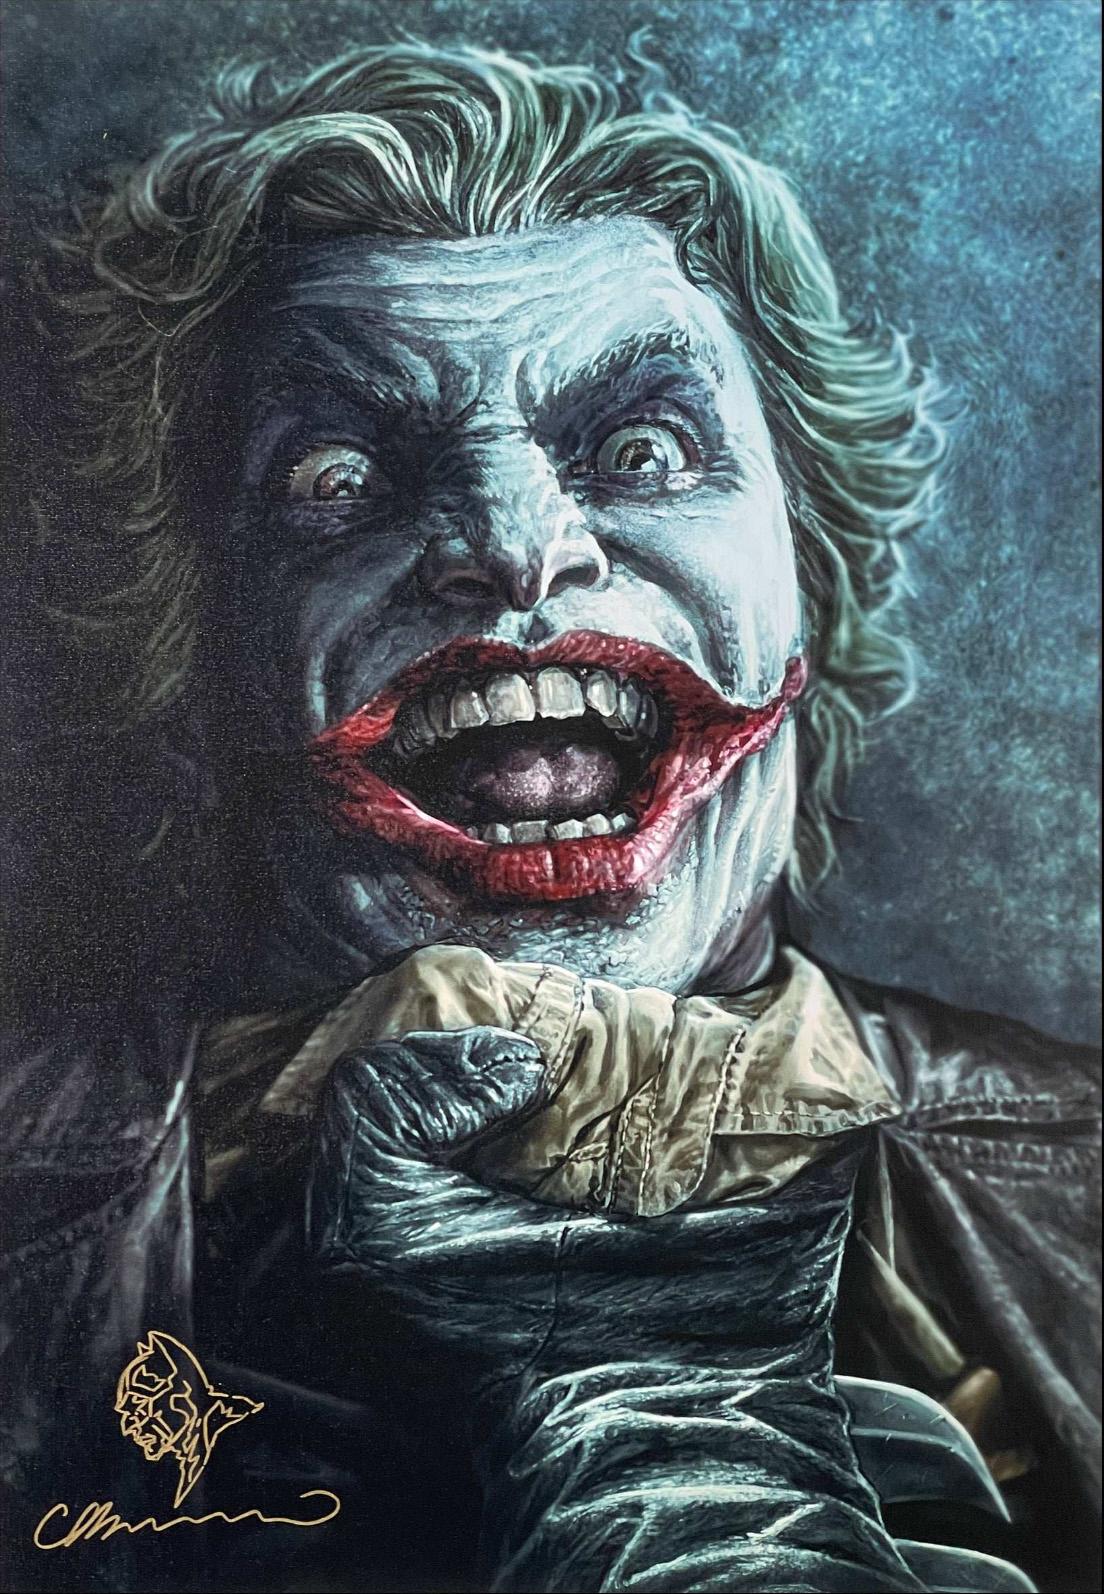 The Joker signed and remarqued by Lee Bermejo - Art by DC Comics Studio Artists